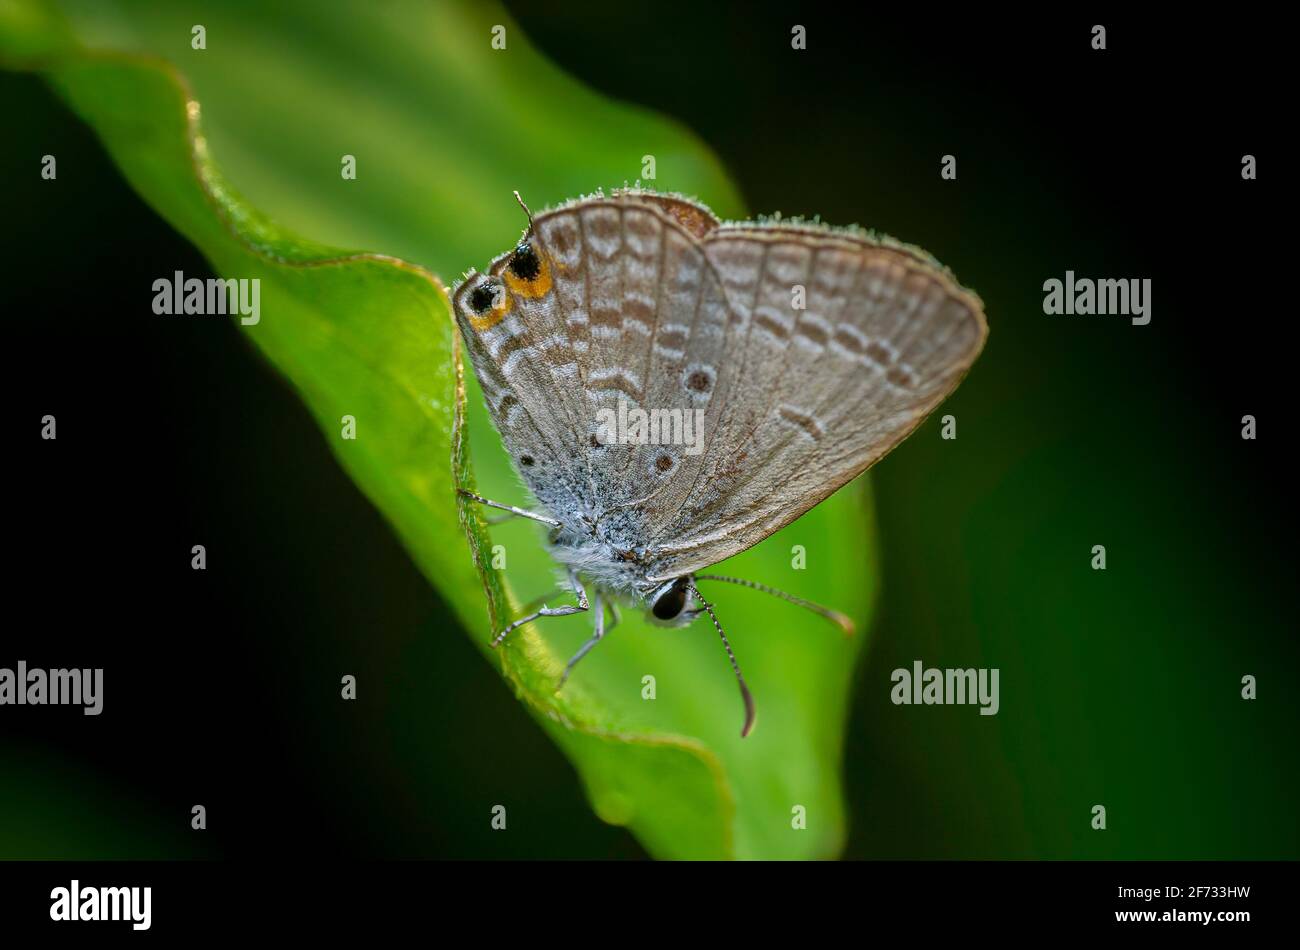 Small butterfly sitting on green leaf and dark background Stock Photo